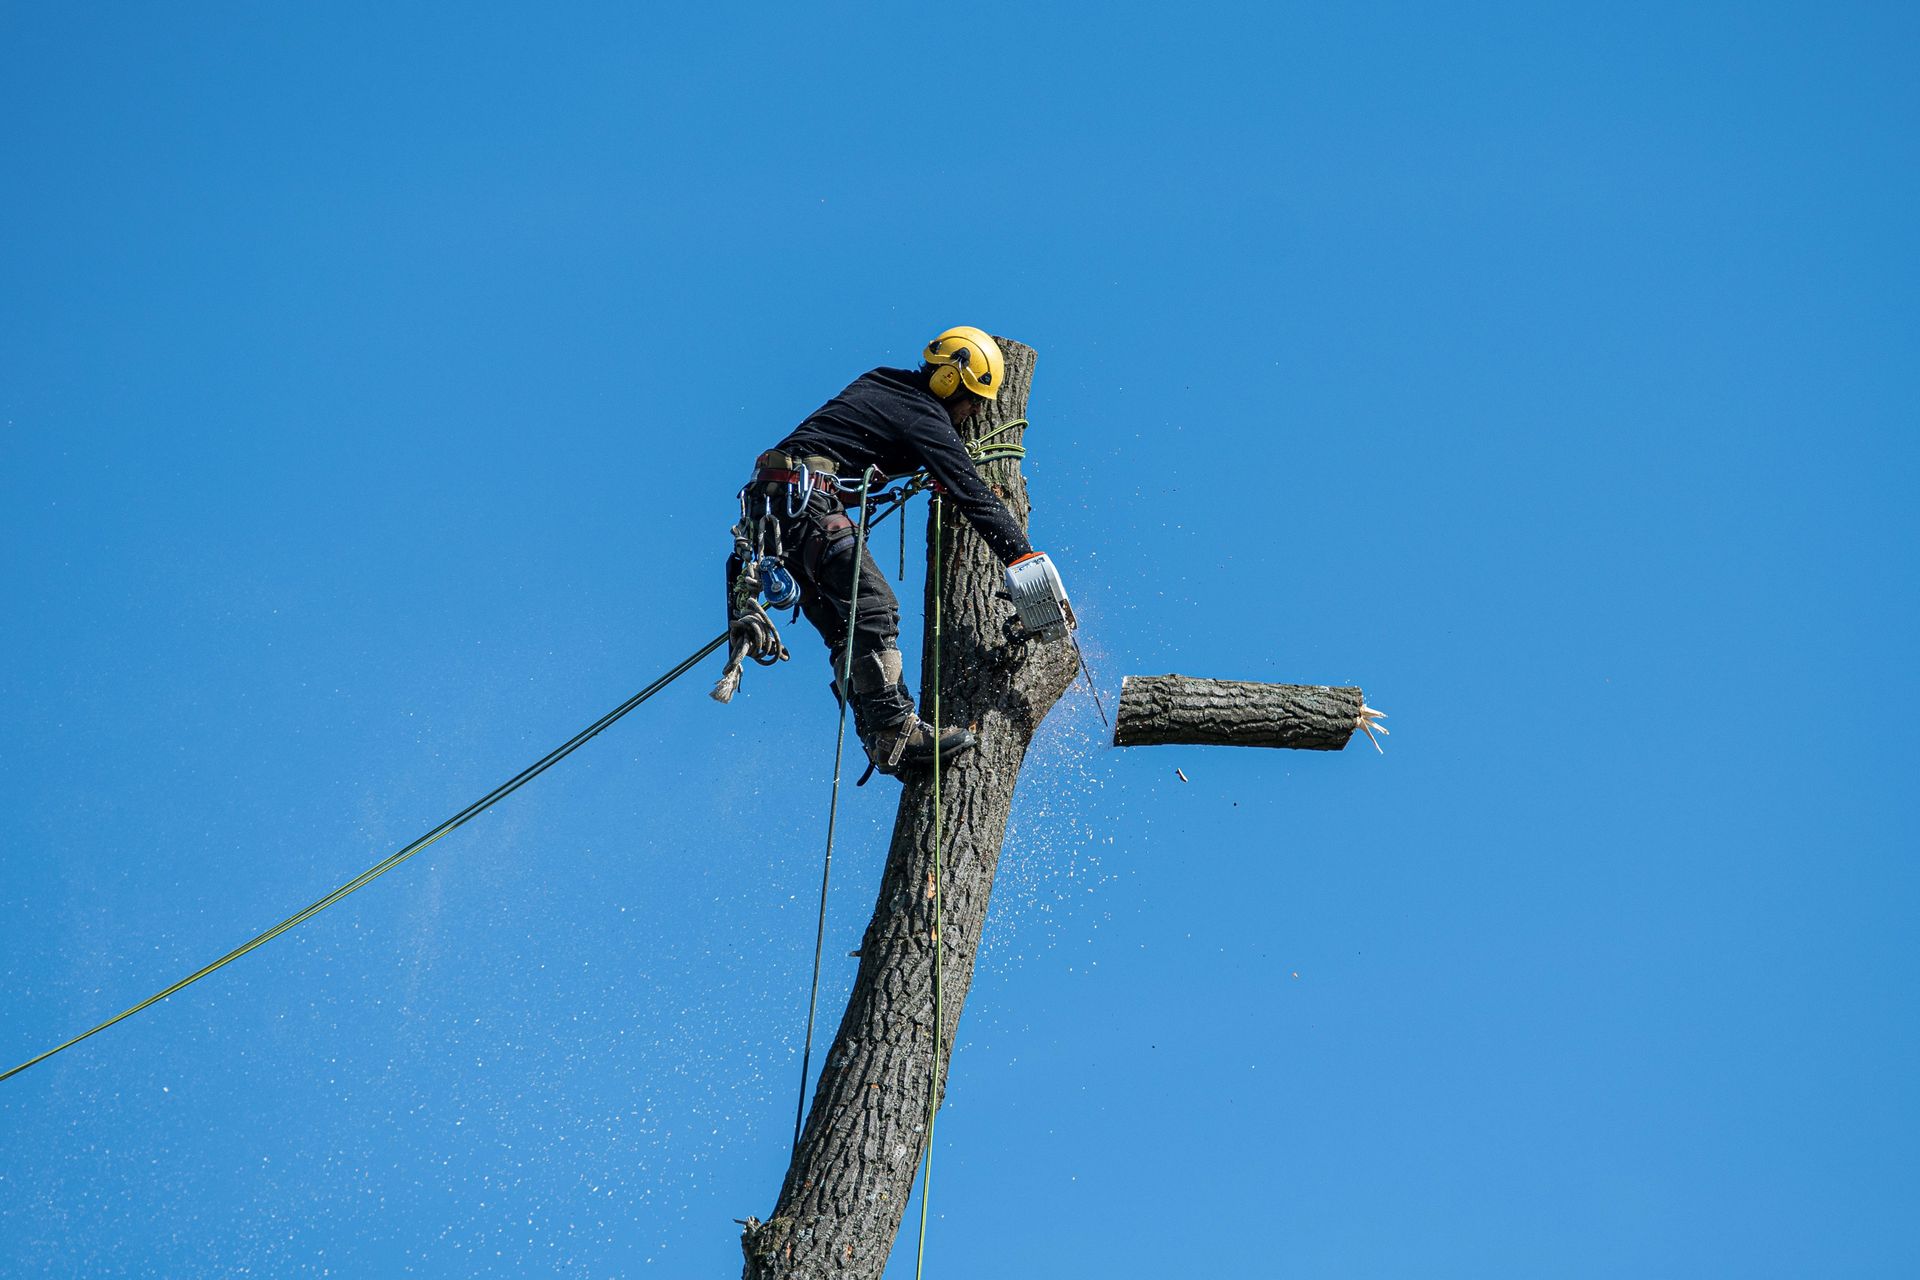 A tree is being cut down by an arborist